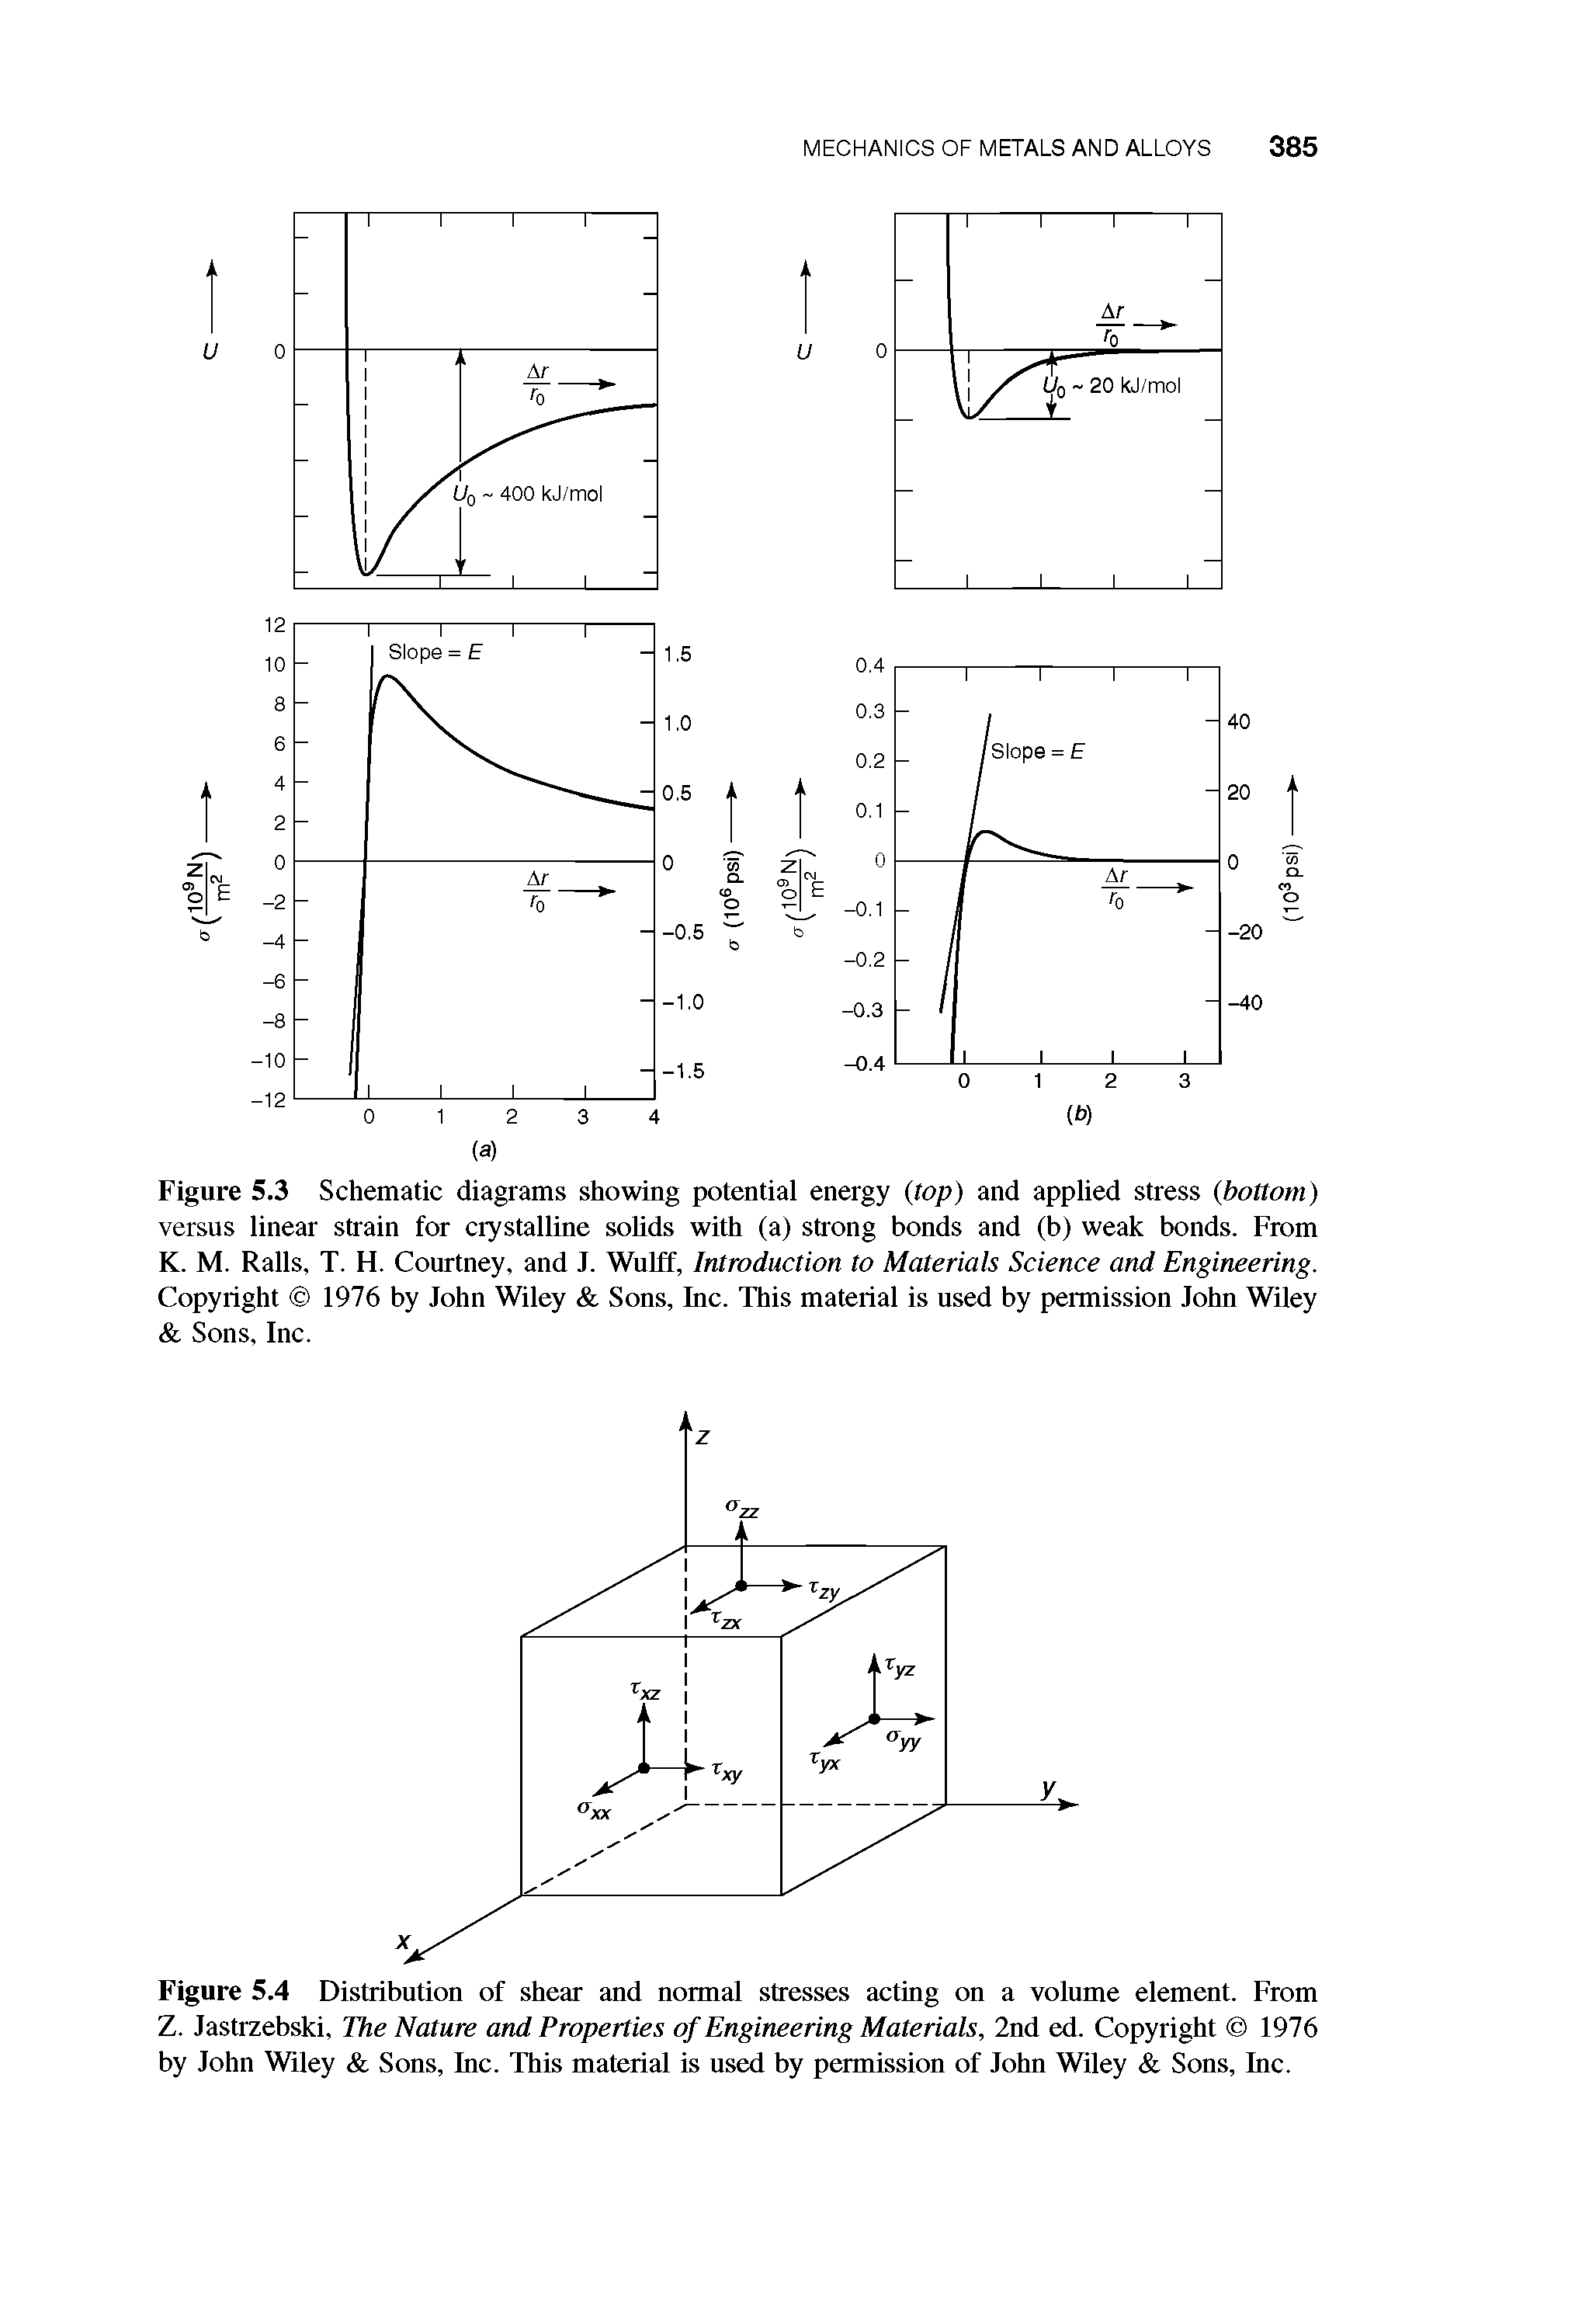 Figure 5.3 Schematic diagrams showing potential energy top) and applied stress (bottom) versus linear strain for crystalline solids with (a) strong bonds and (b) weak bonds. From K. M. Ralls, T. H. Courtney, and J. Wulff, Introduction to Materials Science and Engineering. Copyright 1976 by John Wiley Sons, Inc. This material is used by permission John Wiley Sons, Inc.